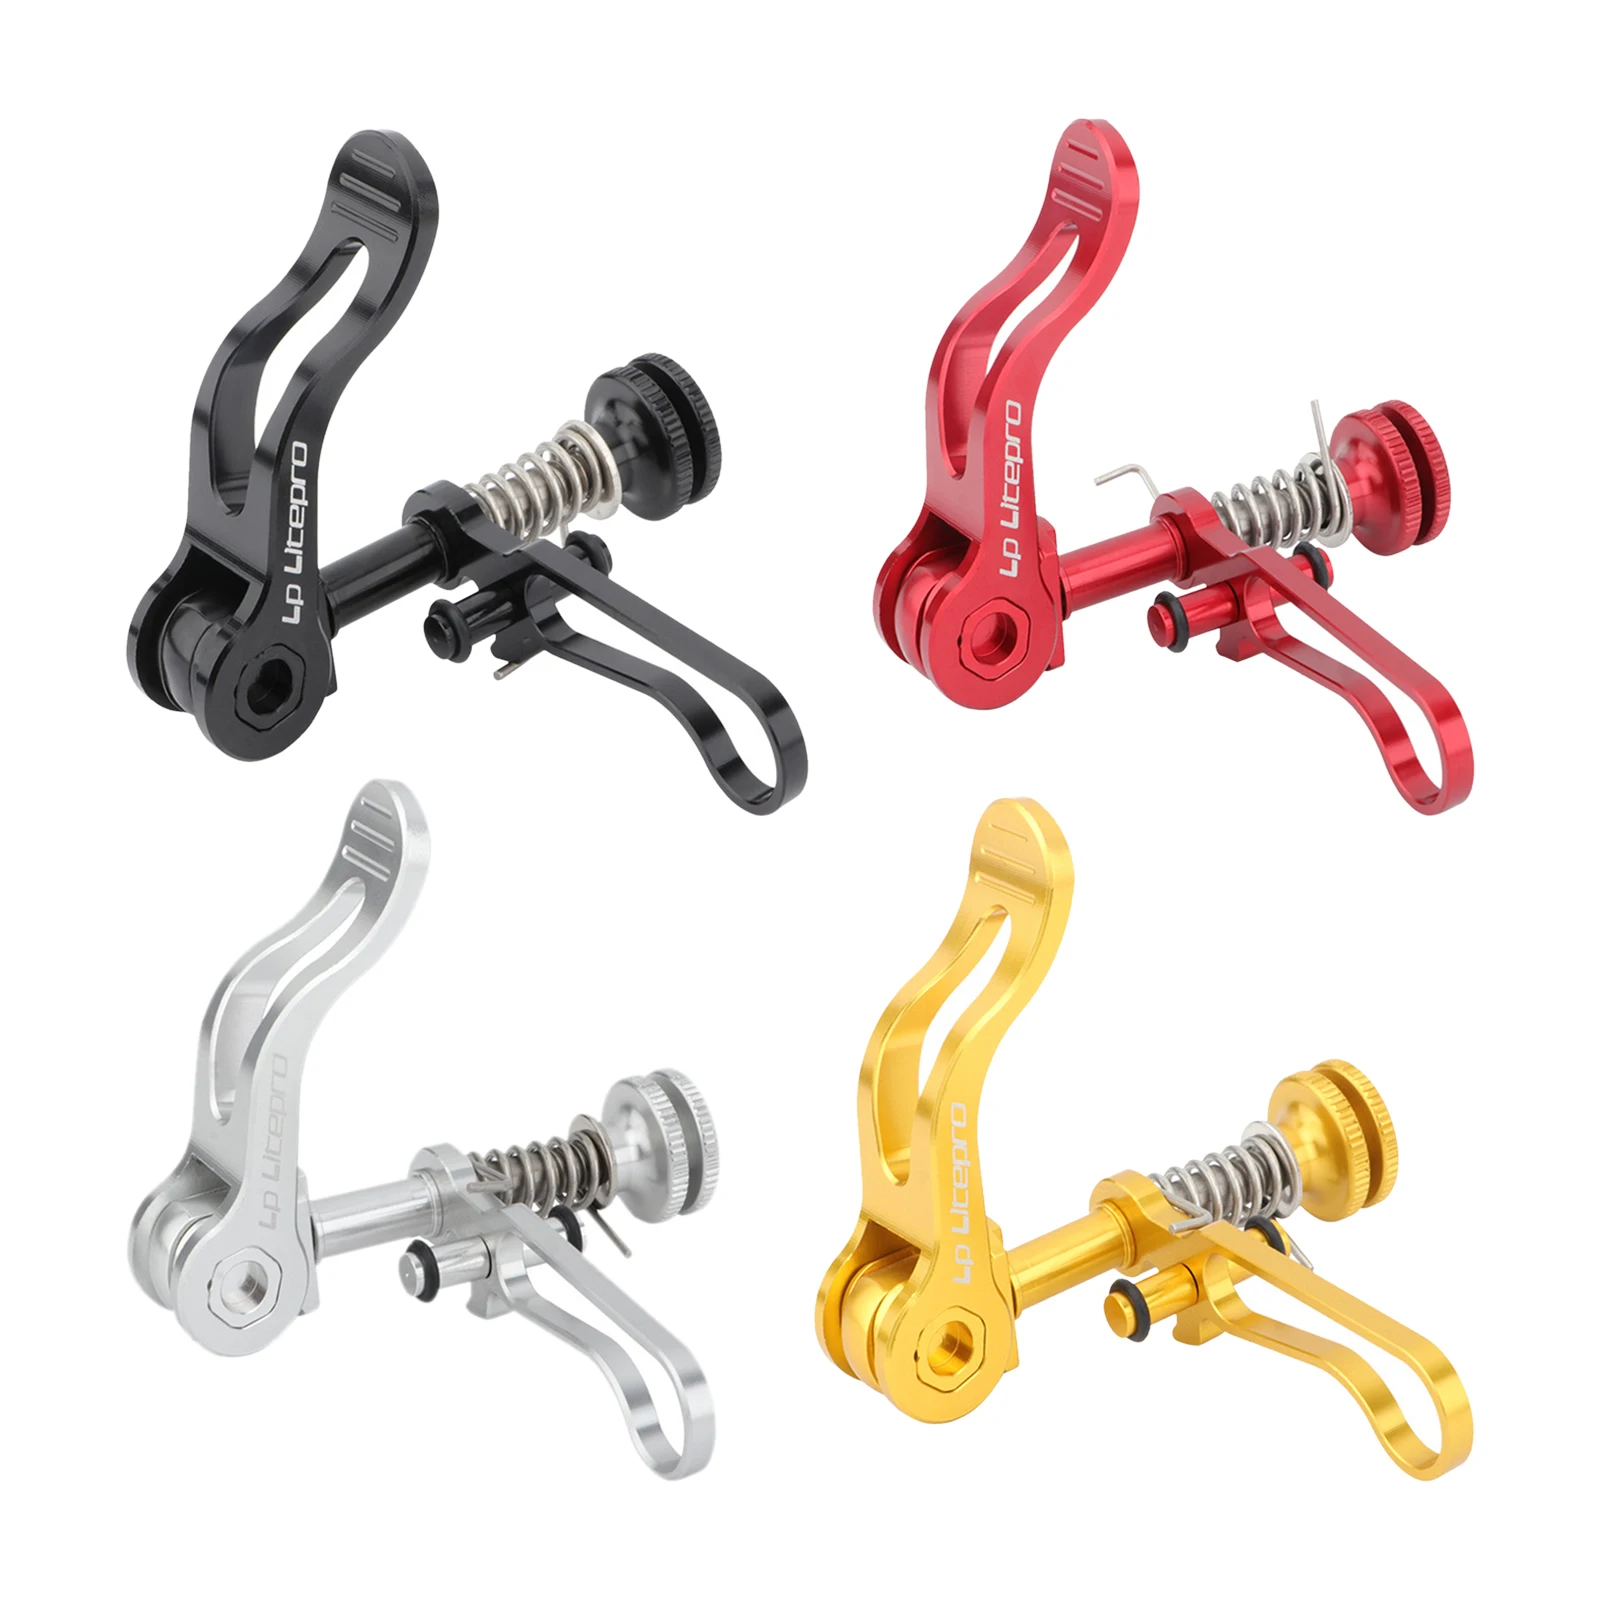 Bike Seatpost Clamp Adjustable Folding Bicycle Lever Durable Quick Release Skewer Fixed Components for   Repair Gear